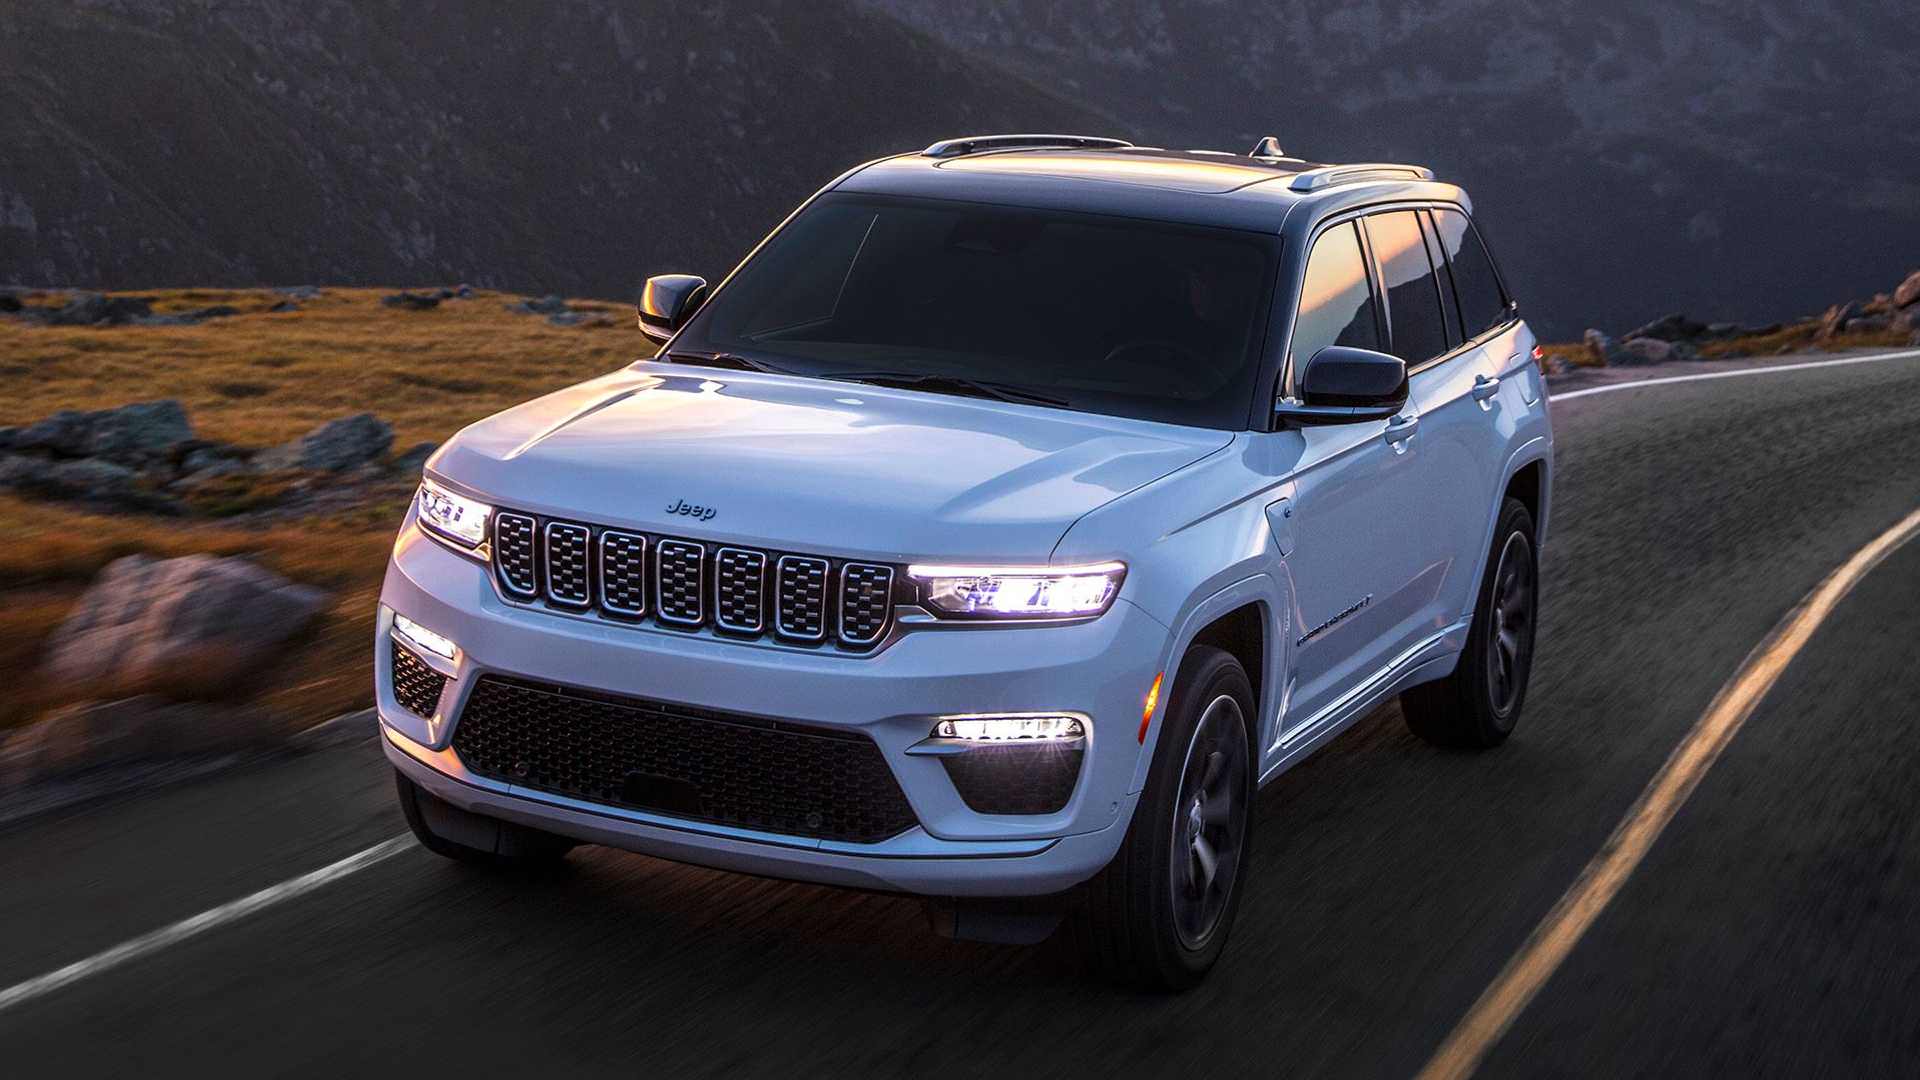 2022 Jeep Grand Cherokee Pricing Announced